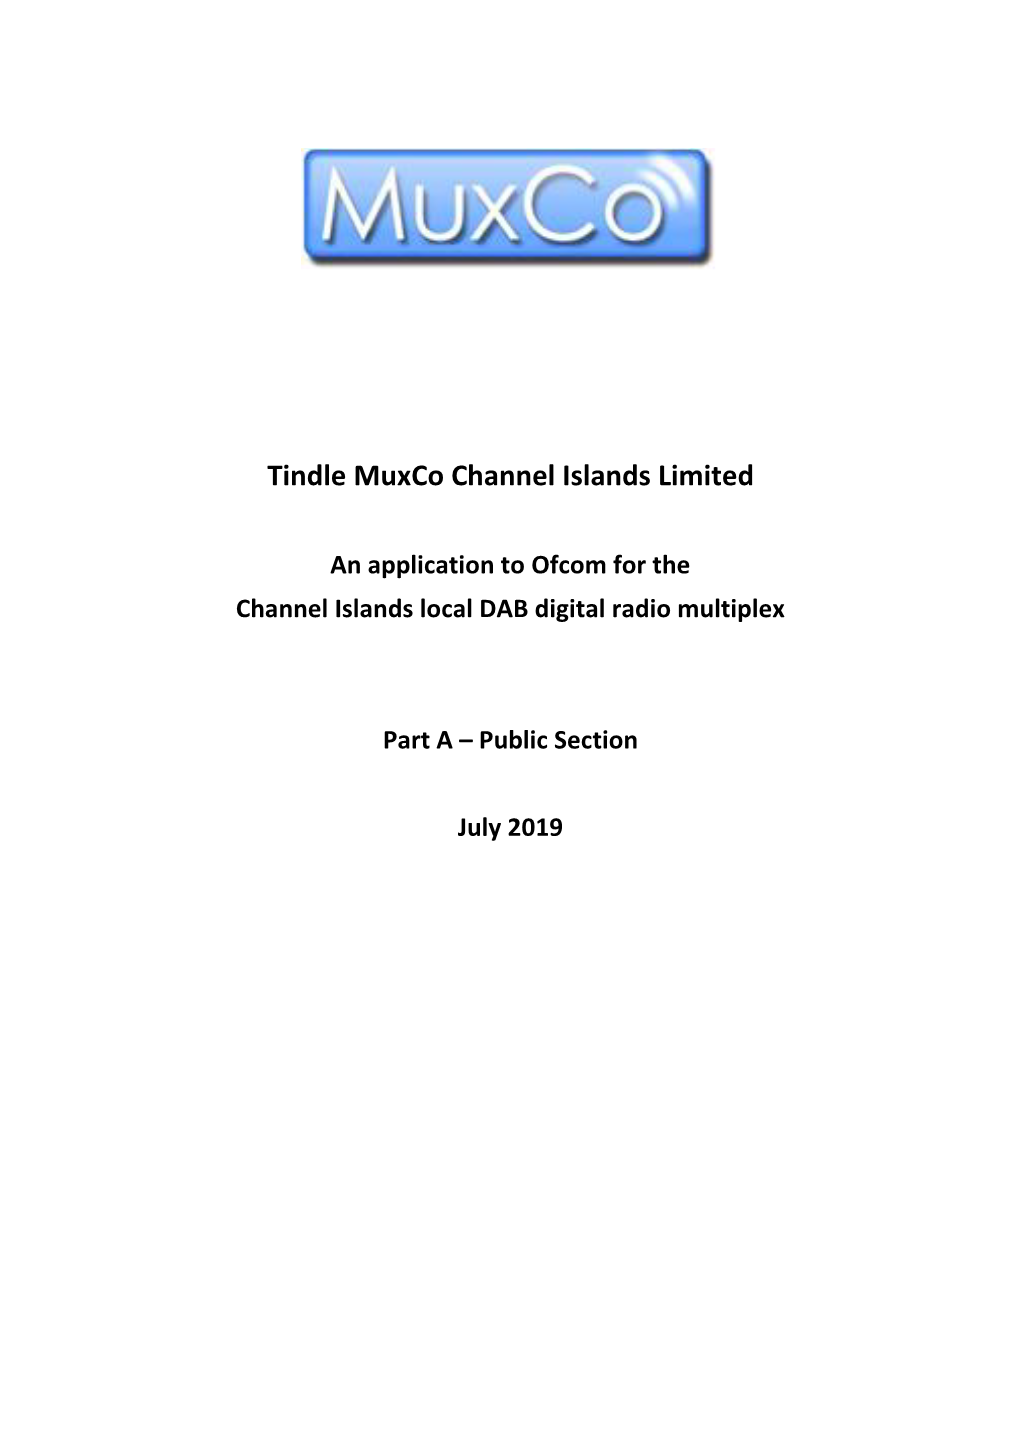 Tindle Muxco Channel Islands Limited